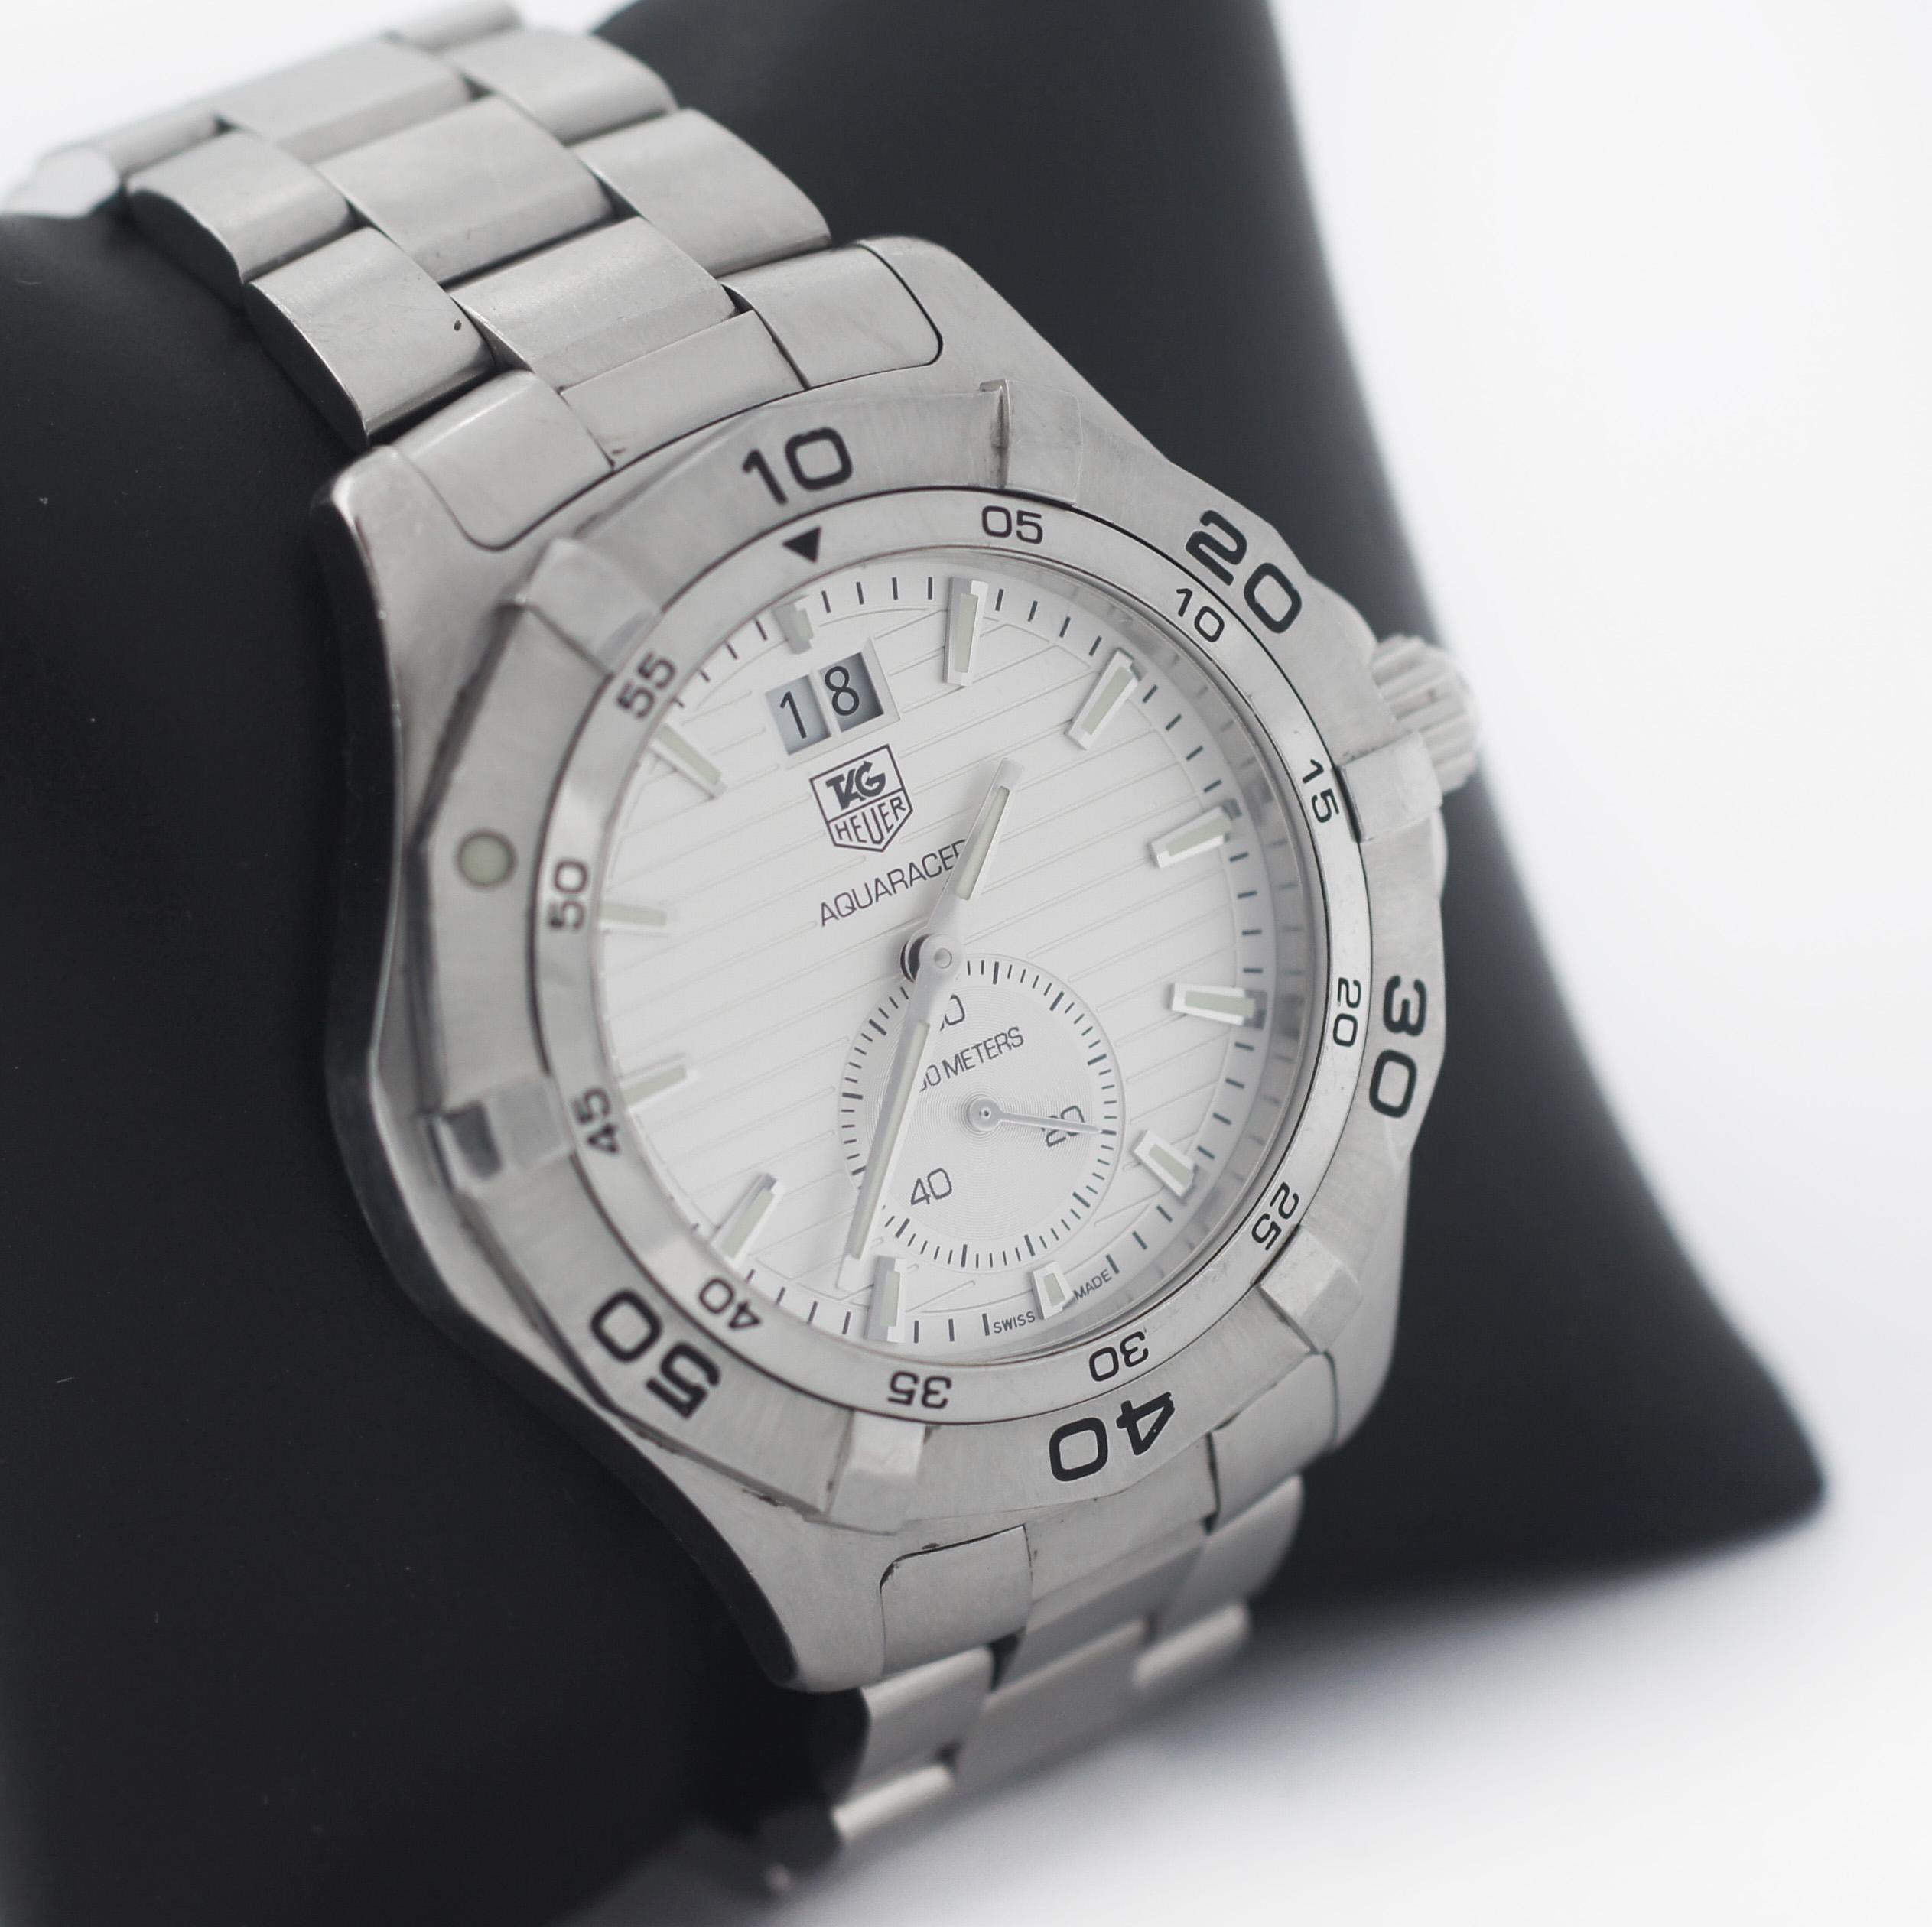 Tag Heuer
Aquaracer
WAF1015
Stainless steel case with a stainless steel link bracelet
Stainless steel bezel
Silver dial with luminous hands and stick hour markers
Minute markers around the outer rim
Luminescent hands and markers
Date display at the